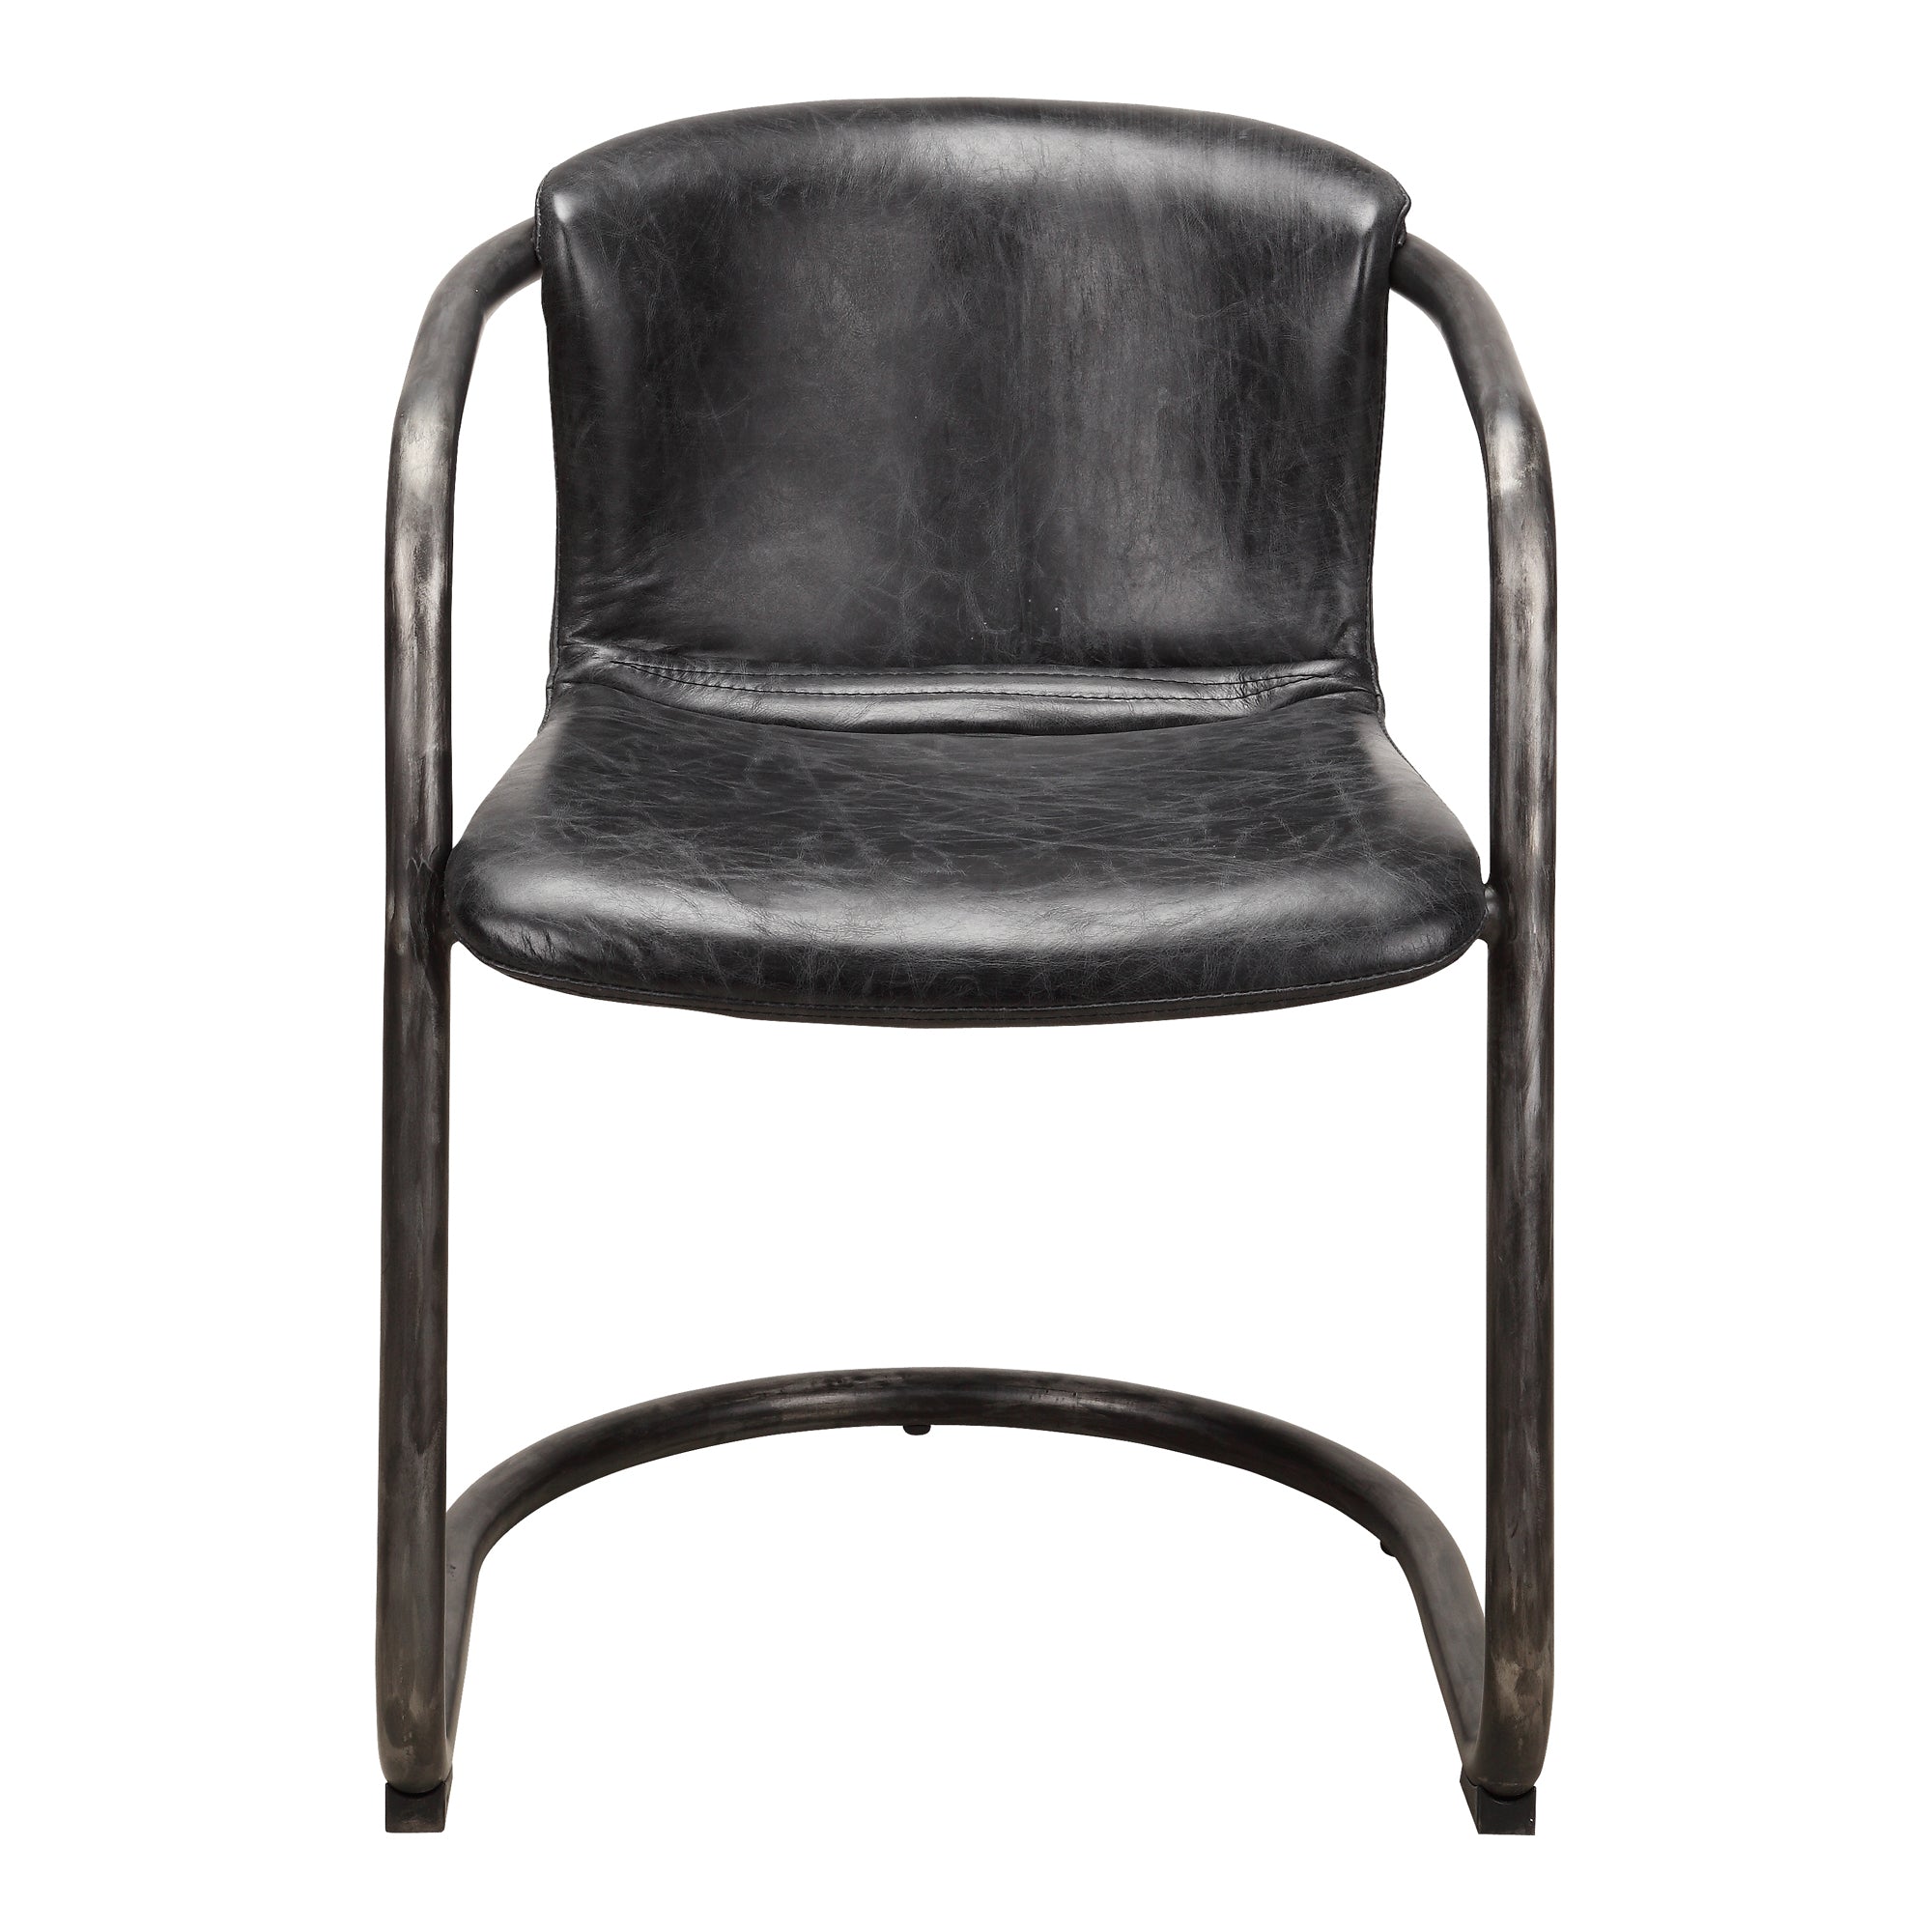 Freeman Dining Chair Onyx Black Leather - Set Of Two